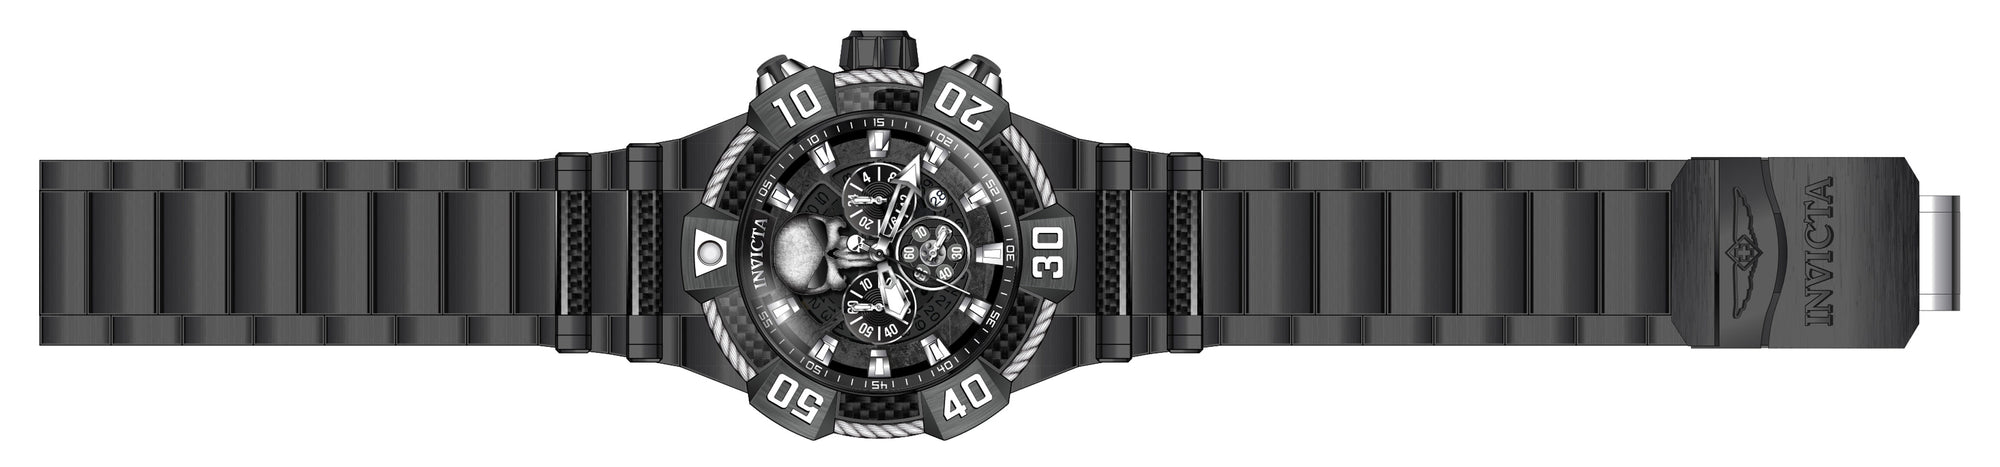 Band For Invicta Marvel 37687